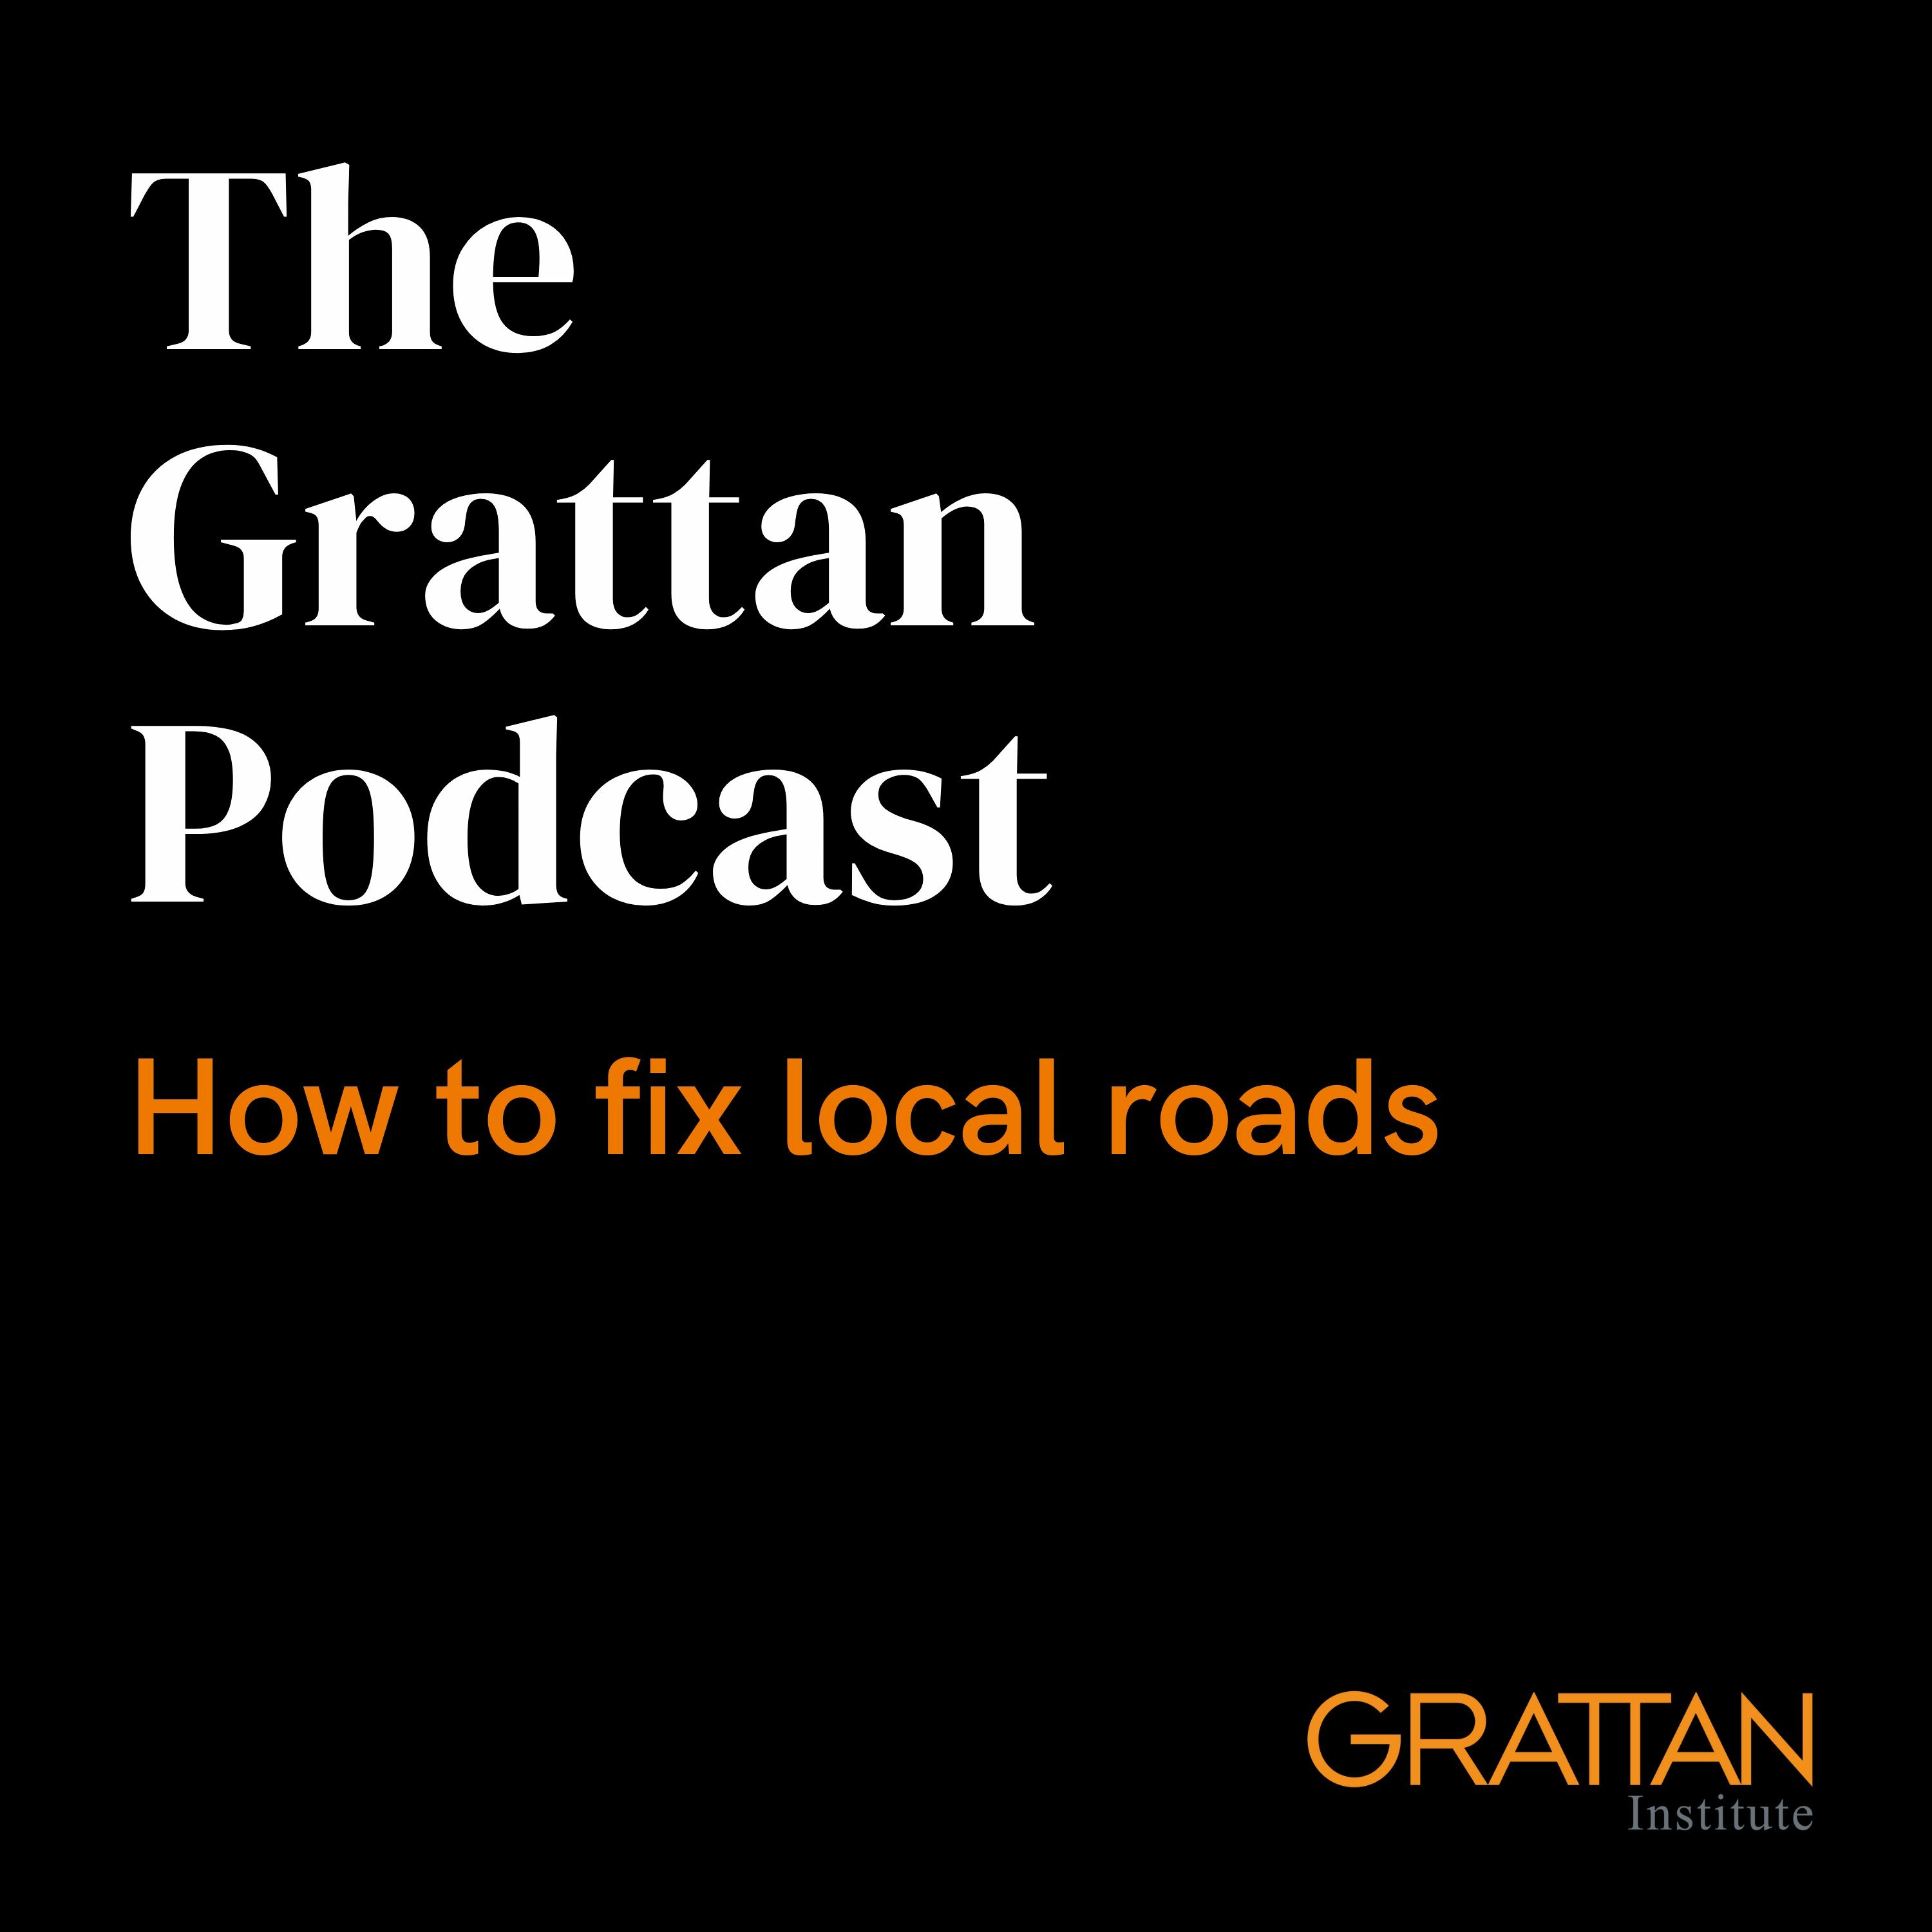 How to fix local roads